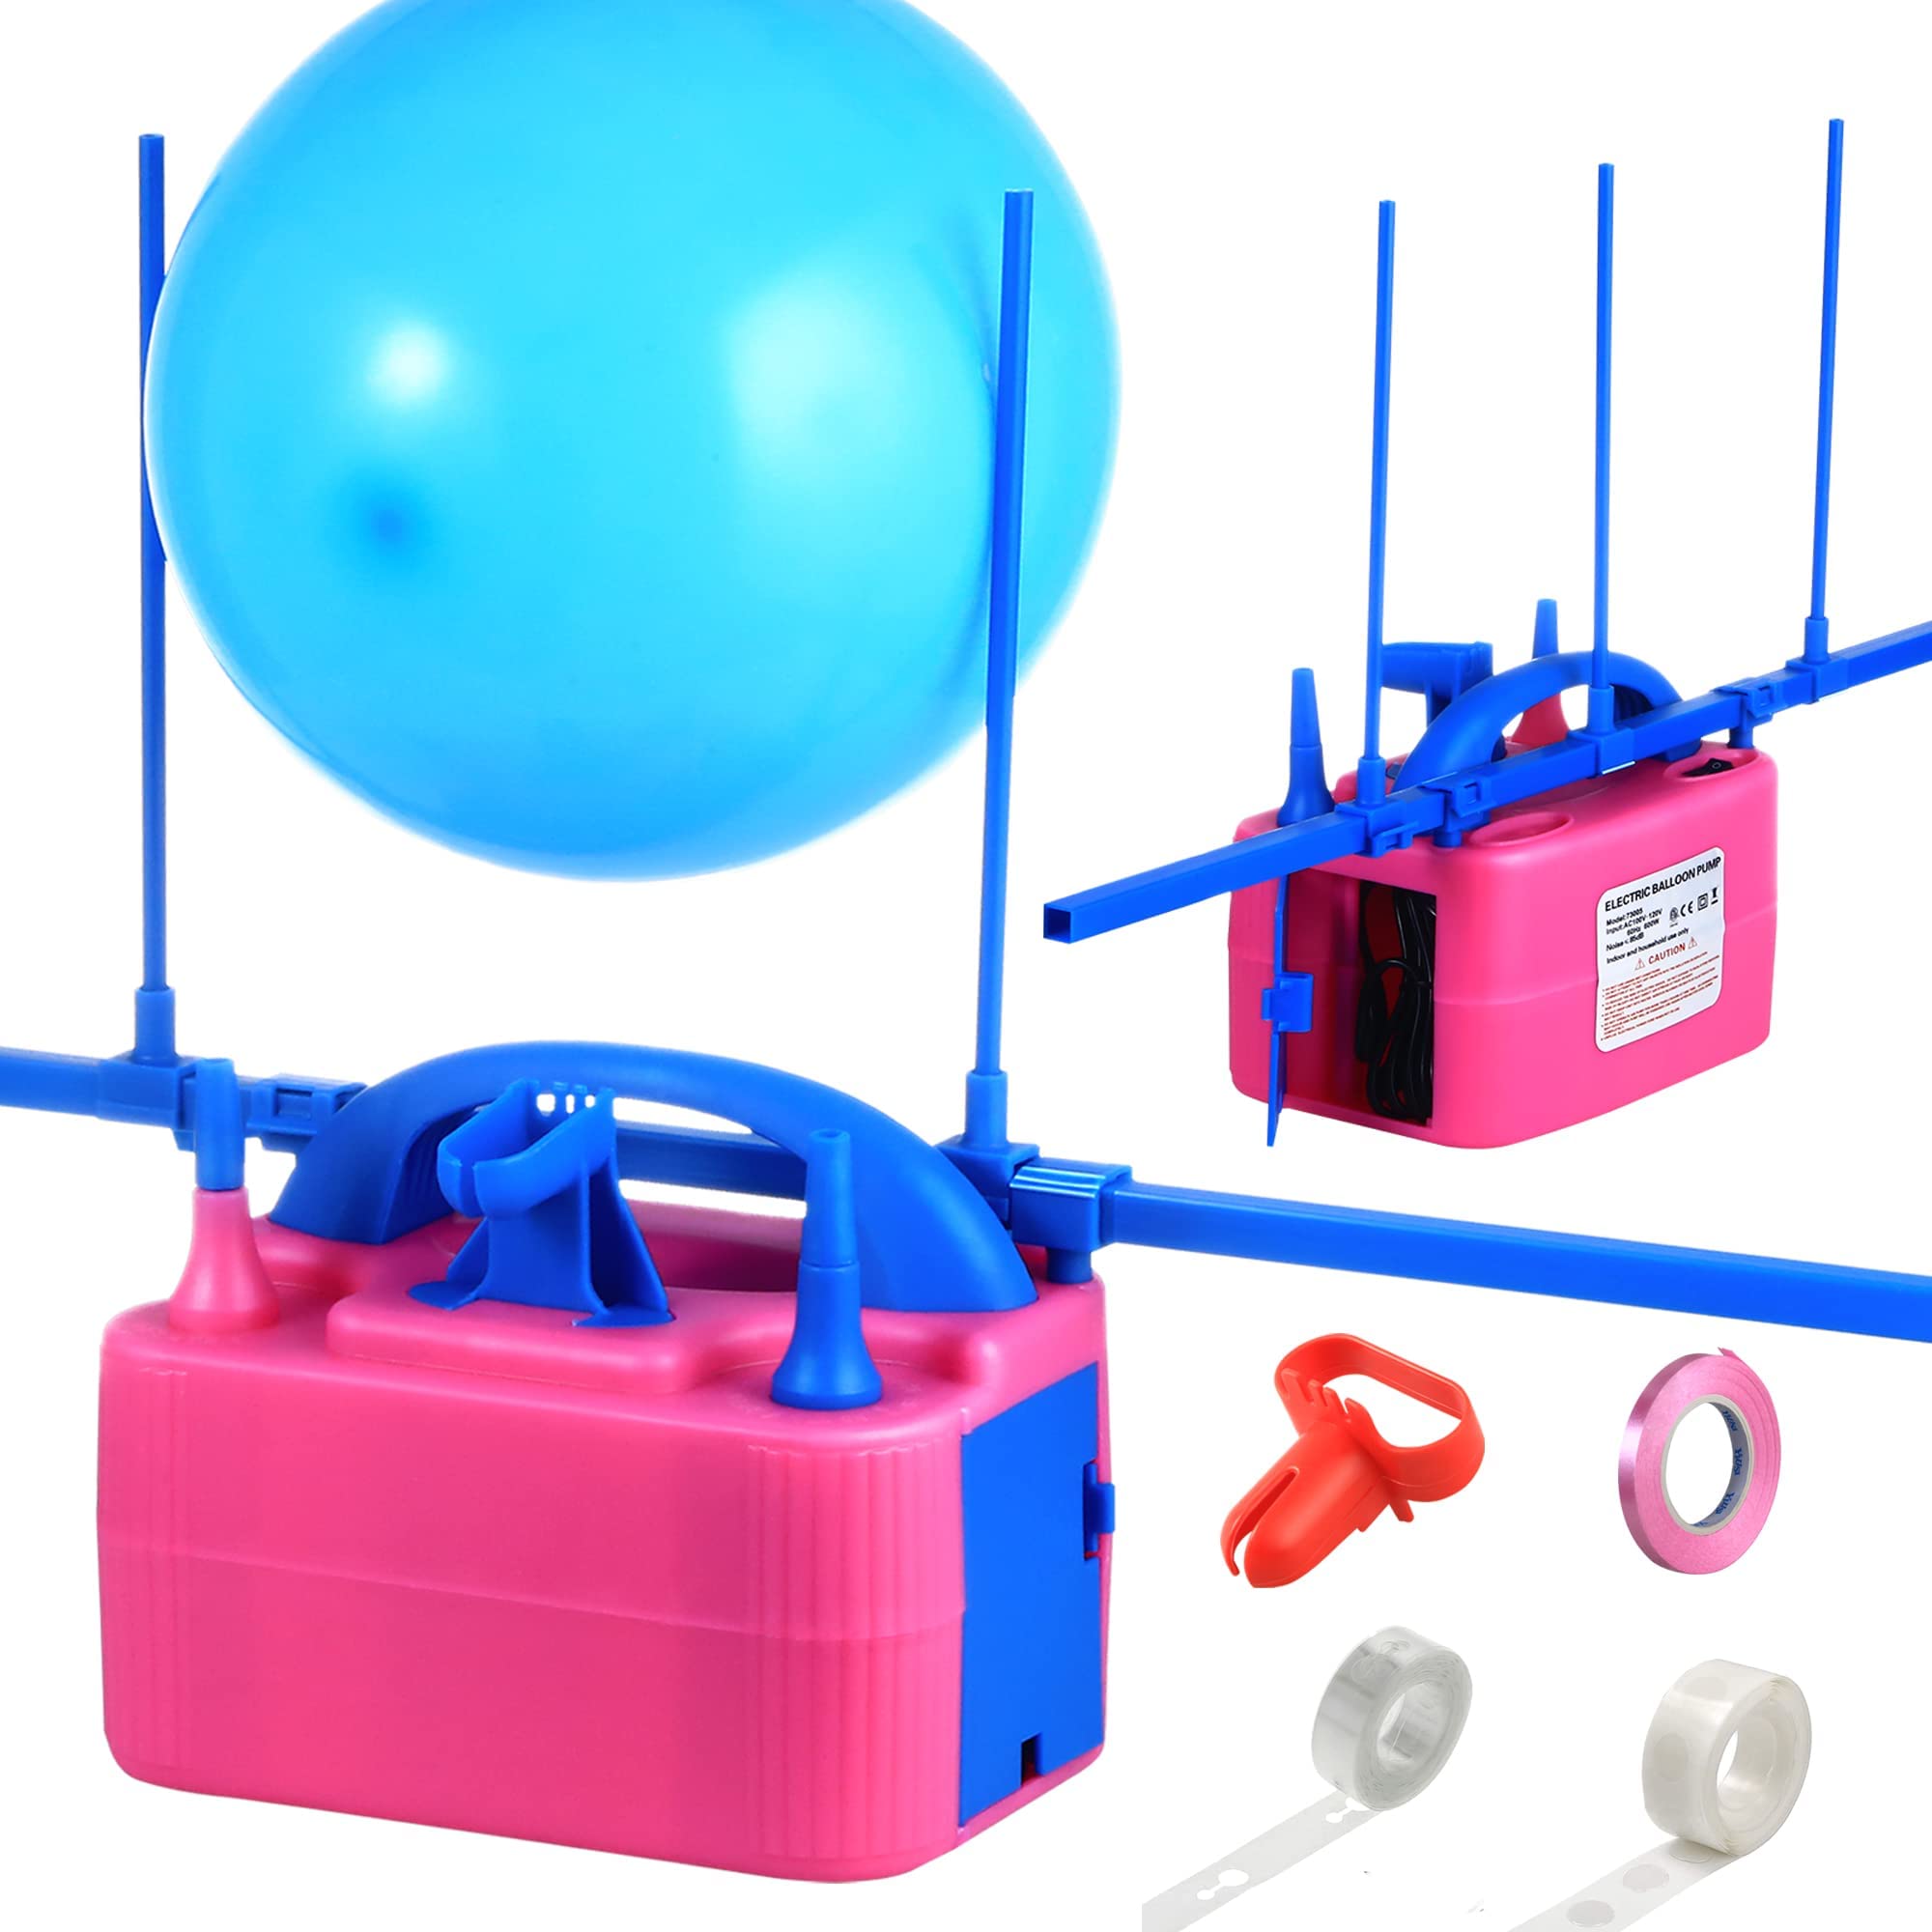 Party Zealot Electric Balloon Inflator Dual Nozzles with Balloon Sizer Air Pump US Standard Plug for Balloon Arch, Balloon Column Stand, and Balloon Decoration